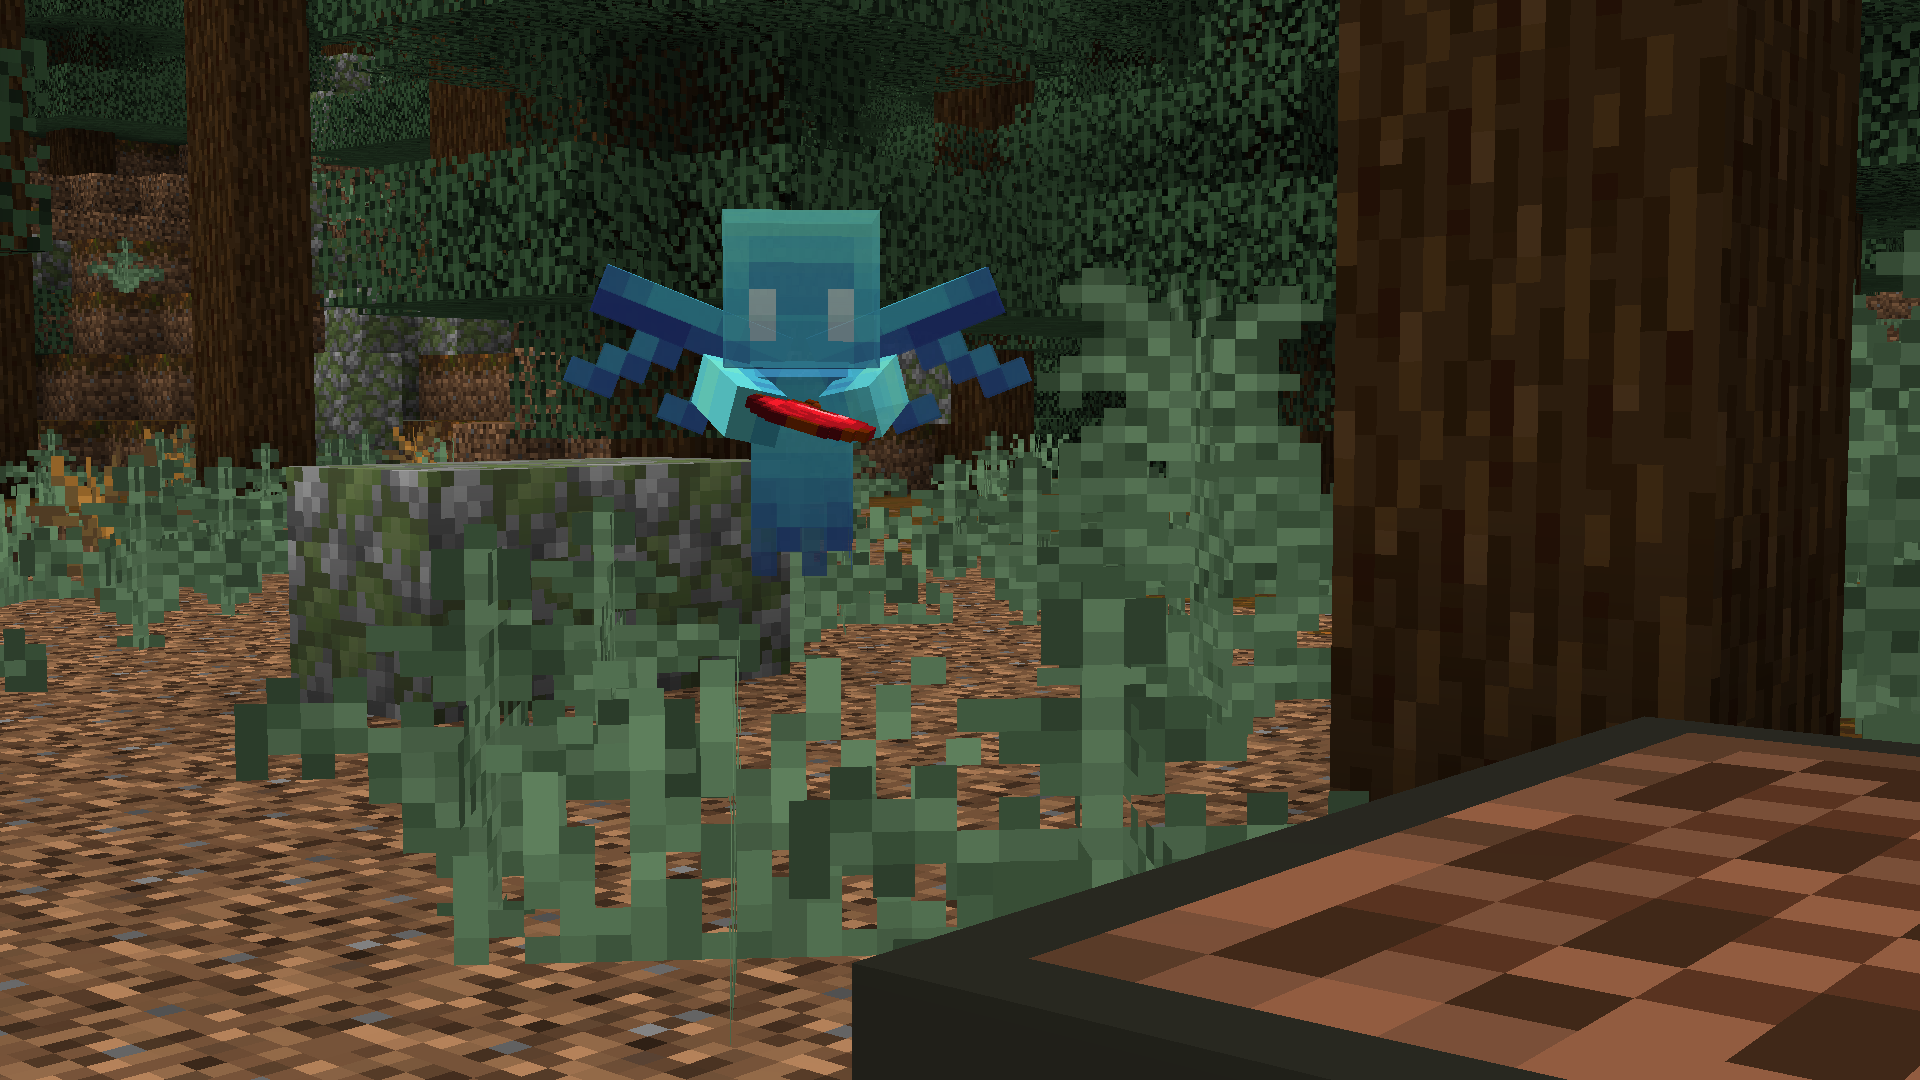 An allay delivering an apple to a noteblock